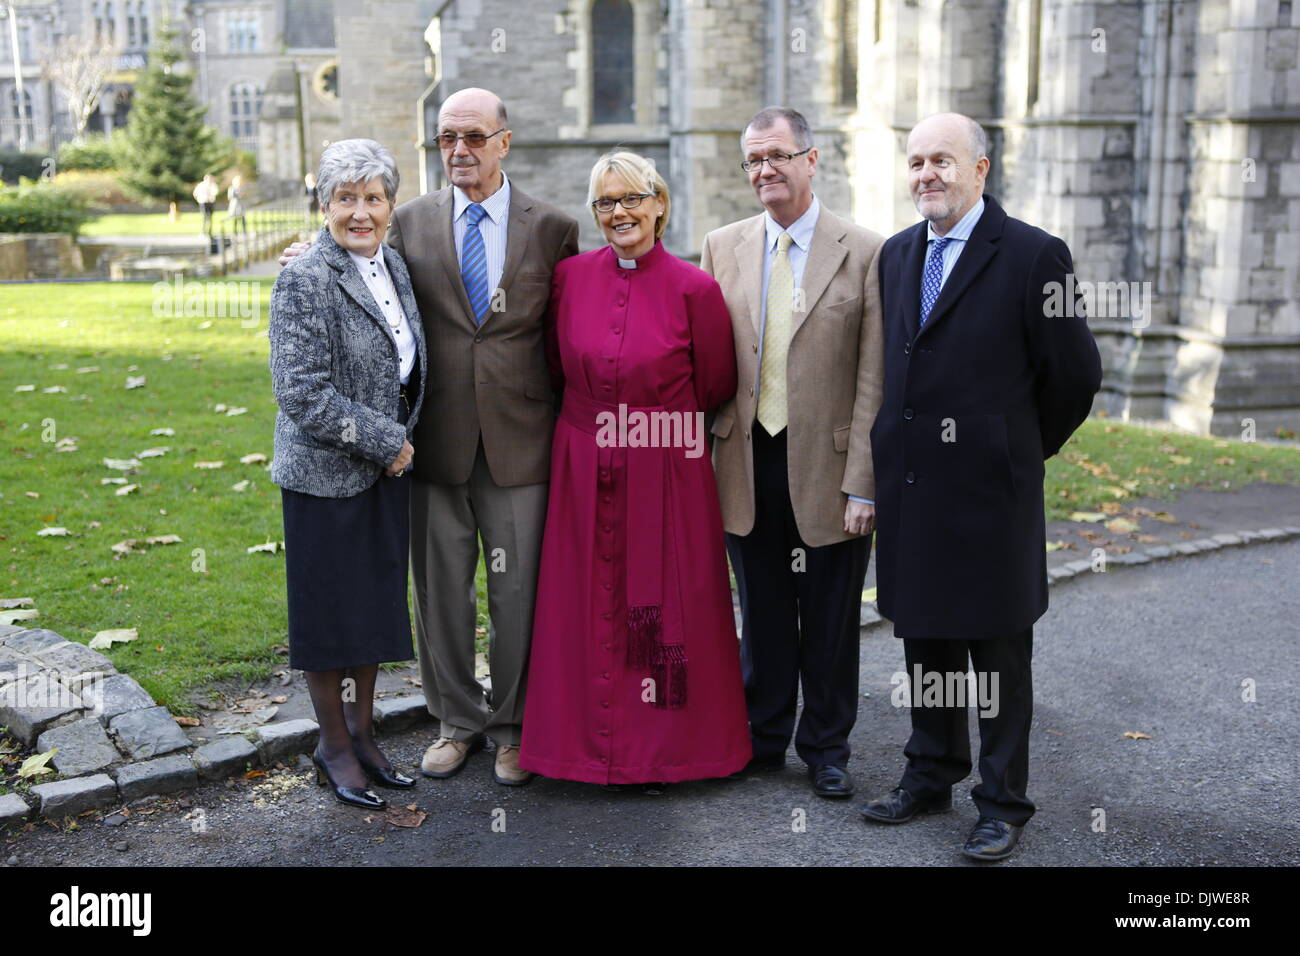 Dublin, Ireland. 30th November 2013. The bishop-elect the Revd Pat Storey (M) is pictured with her step-mother Noelle Shaw (L), her father Norman Shaw (2 L), her brother Stephen Shaw (2 R) and her husband the Revd Earl Storey (R) before the service. The Most Revd Pat Storey has been consecrated as Church of Ireland Bishop of Meath and Kildare in Dublin's Christ Church Cathedral. Credit:  Michael Debets/Alamy Live News Stock Photo